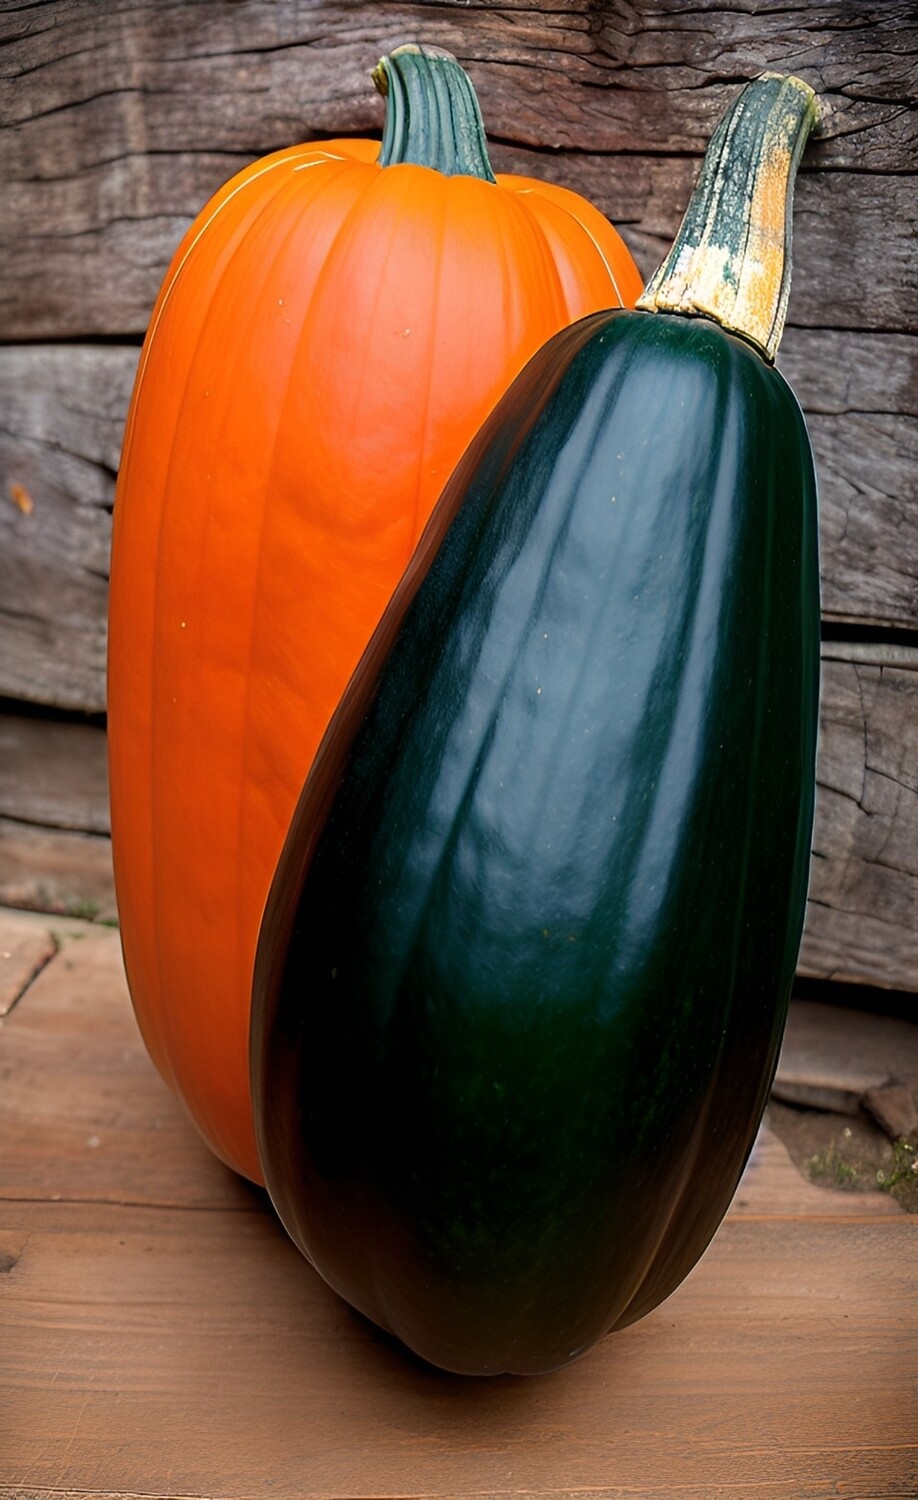 Tips for Growing Winter Squash 